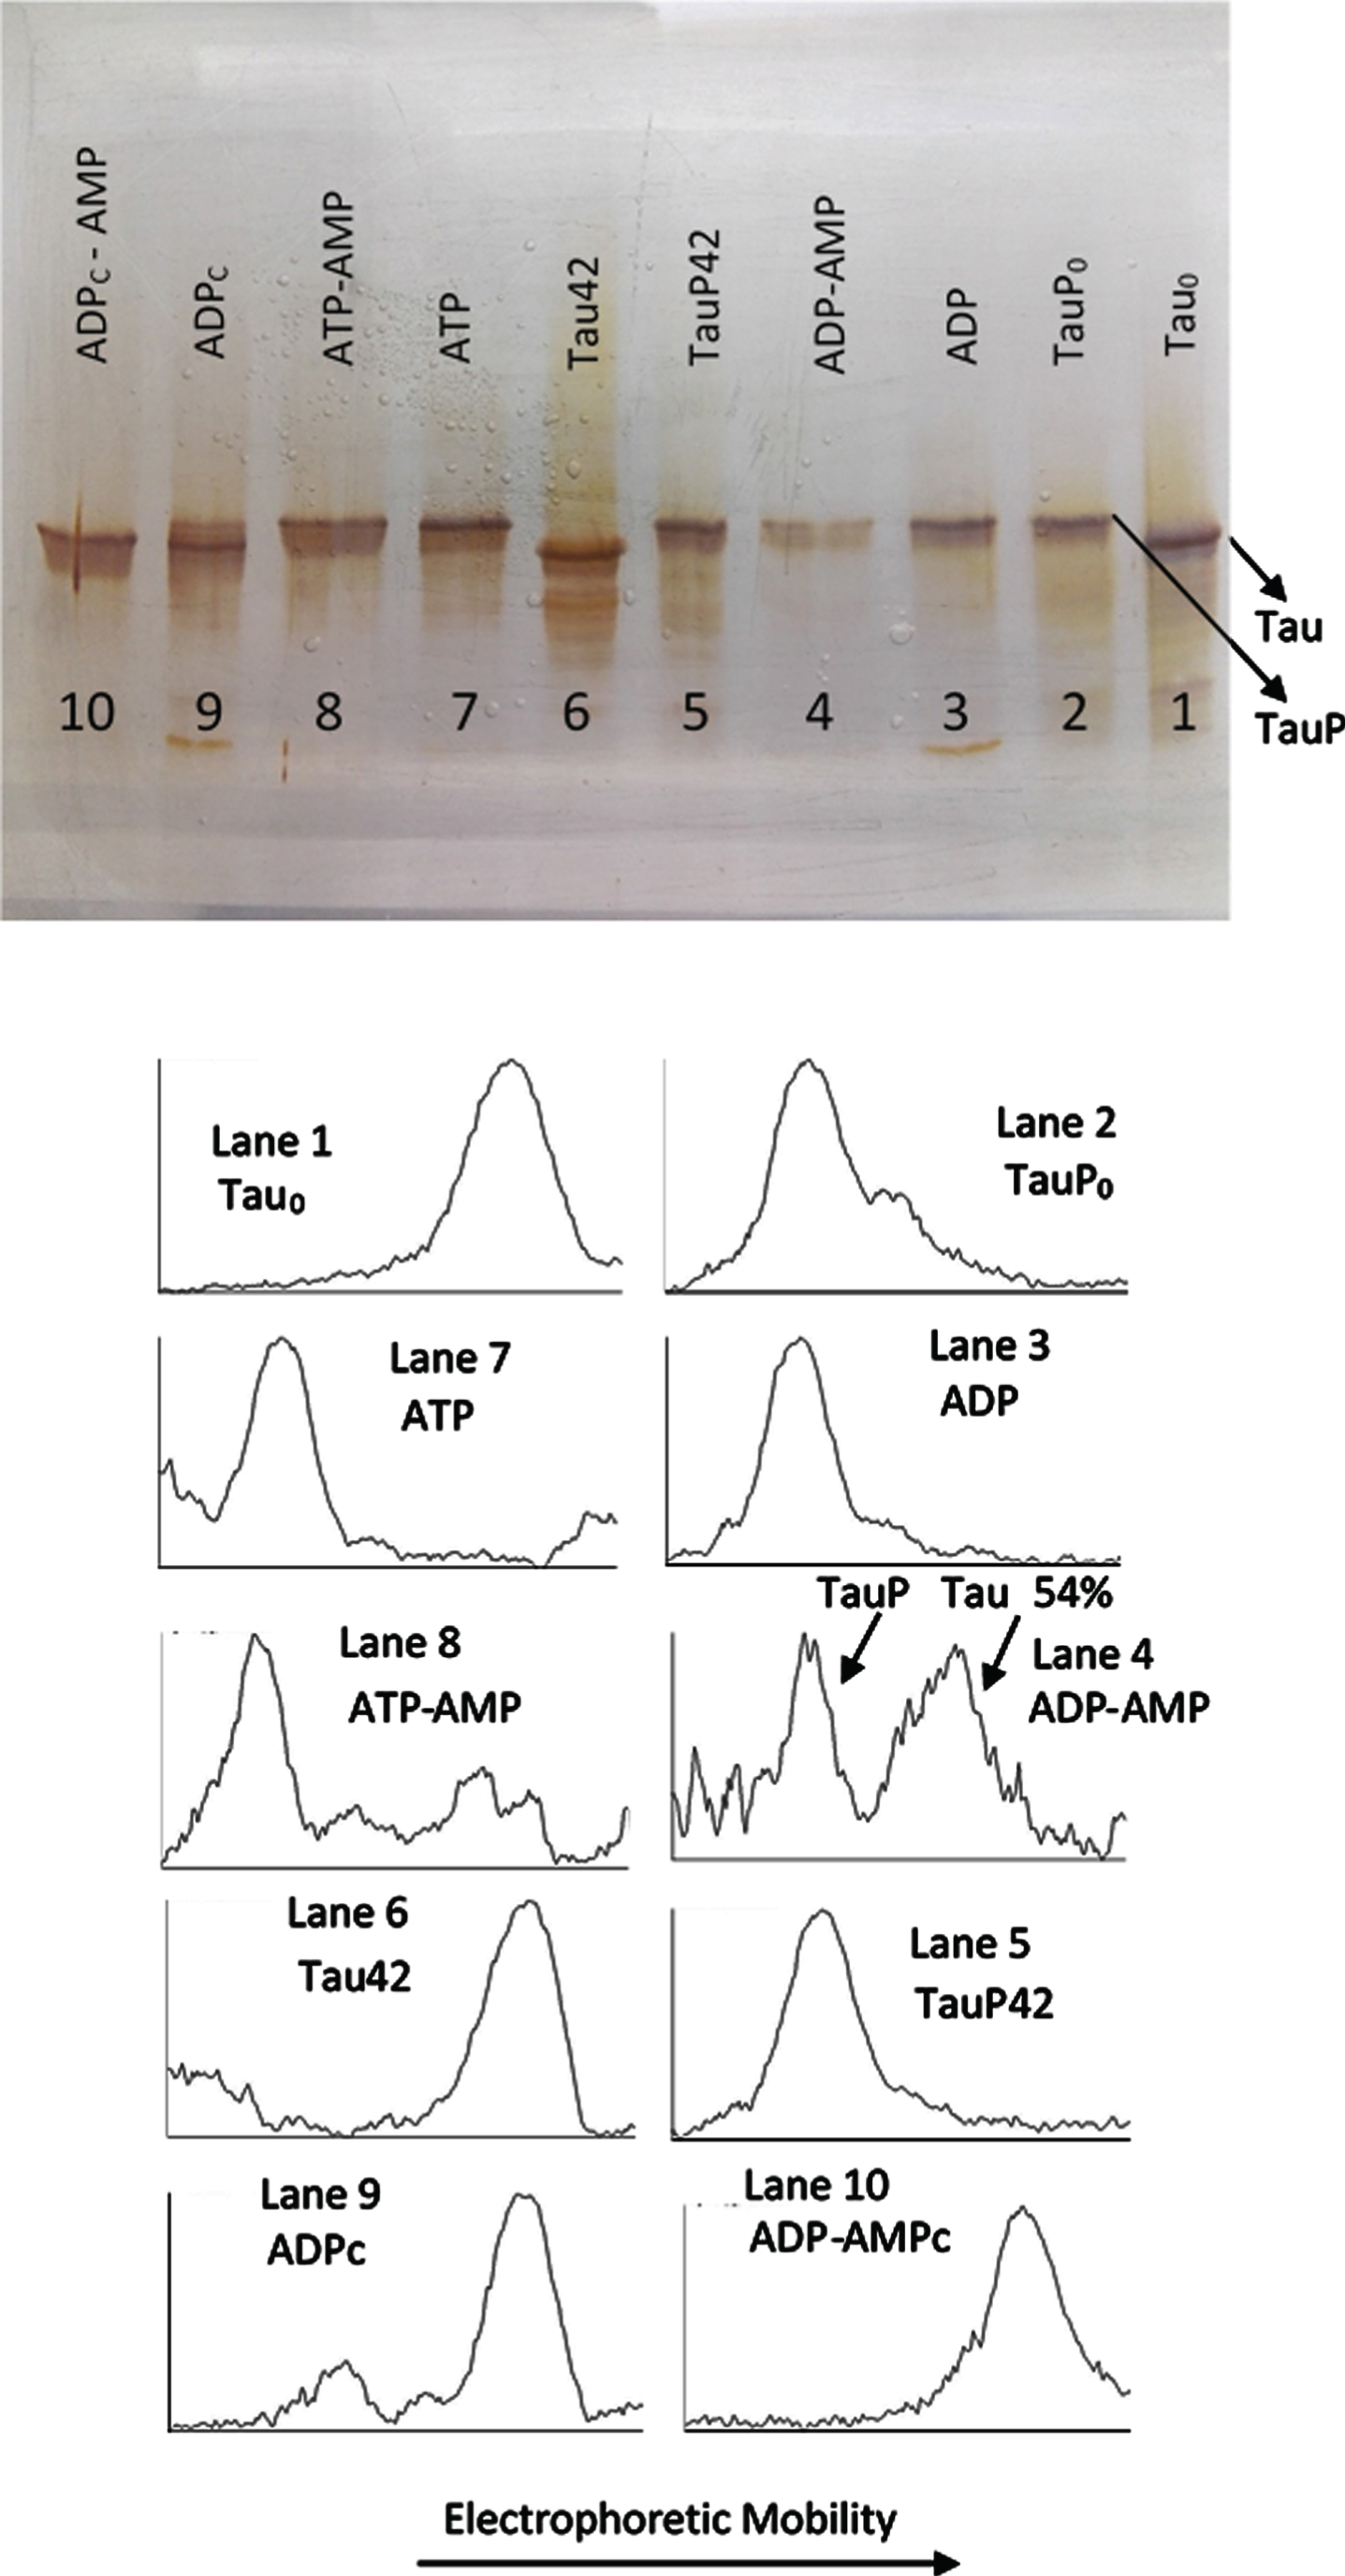 Silver stained of tau and phosphorylated tau separated by SDS-PAGE (8% acrylamide). Lanes 1, 6–10: Tau protein (3 μg/ml final concentration) was diluted in a buffer composed of 22.5 μl of 10 mM Hepes, 0.15 M KCl, 0.25 mM 2-mercaptoethanol, 15 mM MgCl2, and 0.1 mg/ml Ampicillin at pH 7 plus 2.5 μl of a solution of 250 mM potassium phosphate 10 mM and 0.1 mg/ml of Ampicillin at pH 7, containing 10 mM of P1, P5-Di(adenosine-5’) pentaphosphate. This solution was incubated with C-PKA, at 20°C for 42 h, in the presence of 2.5 mM ATP plus the presence (Lane 8) or absence (Lane 7) of 25 mM of AMP and in presence of 2.5 mM ADP plus the presence (Lane 10) or absence (Lane 9) of 25 mM of AMP. Lanes 1 and 6 are controls of tau in the absence of C-PKA and nucleotides, incubated for 0 h (Lane 1) and 42 h (Lane 2). Lanes 2-5: Phosphorylated tau (TauP) (2.7 μg/ml, final concentration) was diluted in the same buffer solution as described for tau and incubated with C-PKA, at 20°C for 42 h, in the presence of 2.5 mM ADP plus the presence (Lane 4) or absence (Lane 3) of 25 mM of AMP; dephosphorylation percentage of TauP is indicated. Lanes 2 and 5 are controls of TauP in the presence of 2.5 mM ADP but in the absence of C-PKA, incubated for 0 h (Lane 2) and 42 h (Lane 5). 5 units of C-PKA from Promega were used, when added. Both tau and TauP solutions were boiled before used.